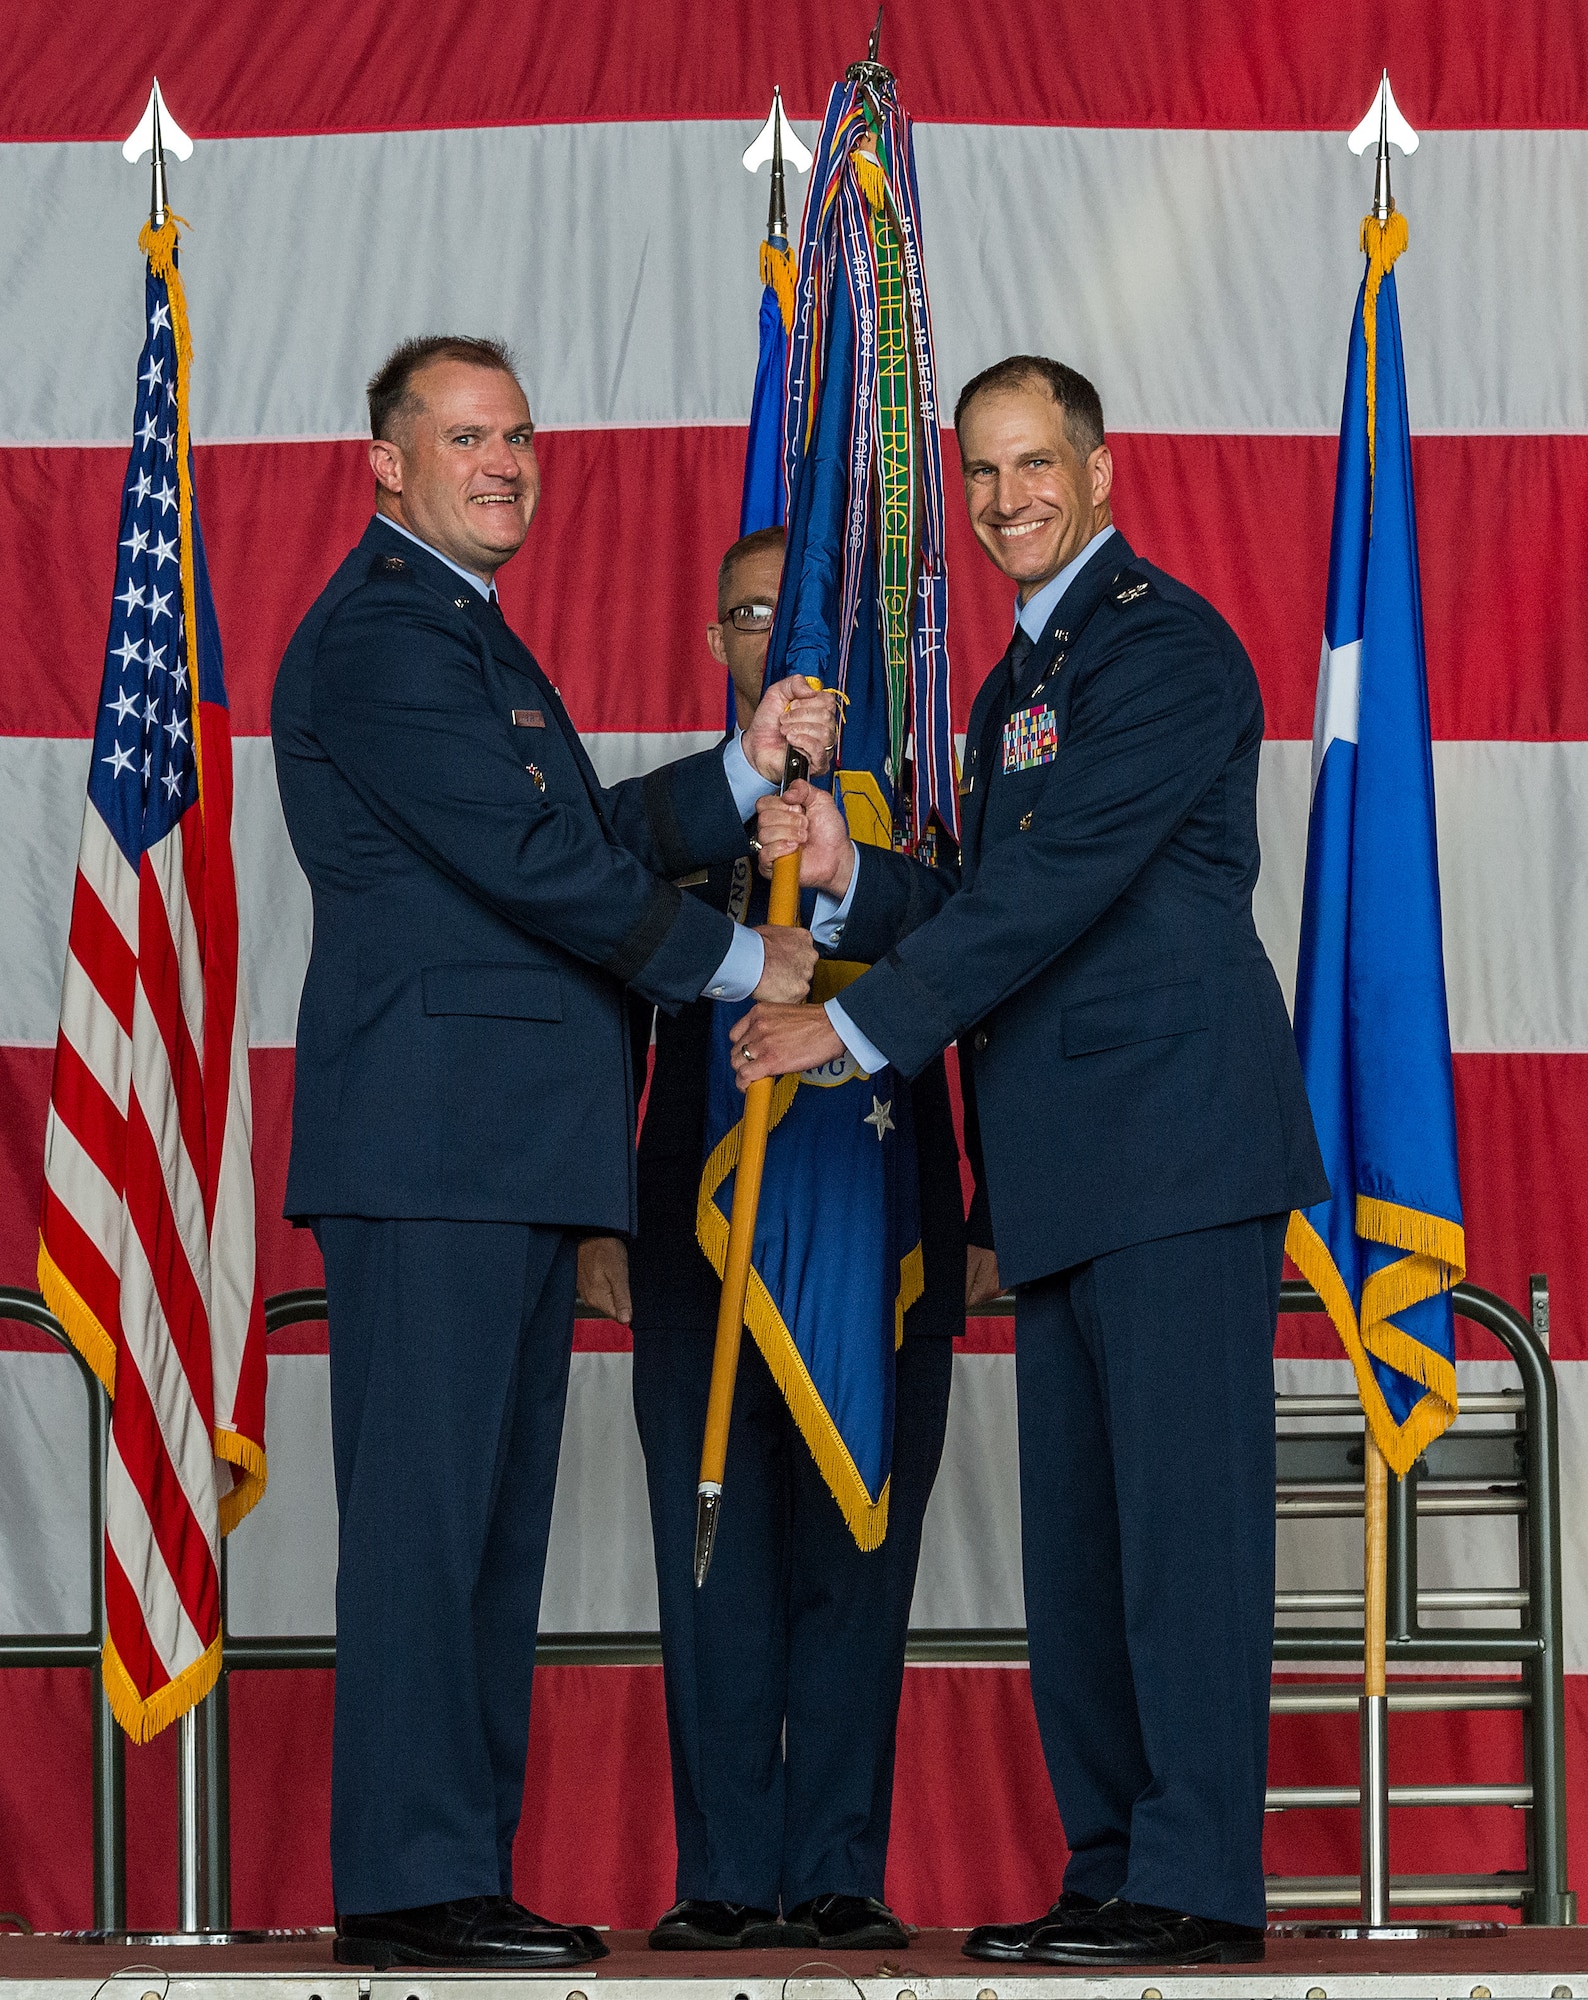 Maj. Gen. Thad Bibb, left, 18th Air Force commander, presents the 436th Airlift Wing guidon to Col. Matthew Husemann, 436th AW commander, during an assumption of command ceremony on Dover Air Force Base, Delaware, June 4, 2021. Upon taking command, Husemann became the wing’s 36th commander. (U.S. Air Force photo by Roland Balik)